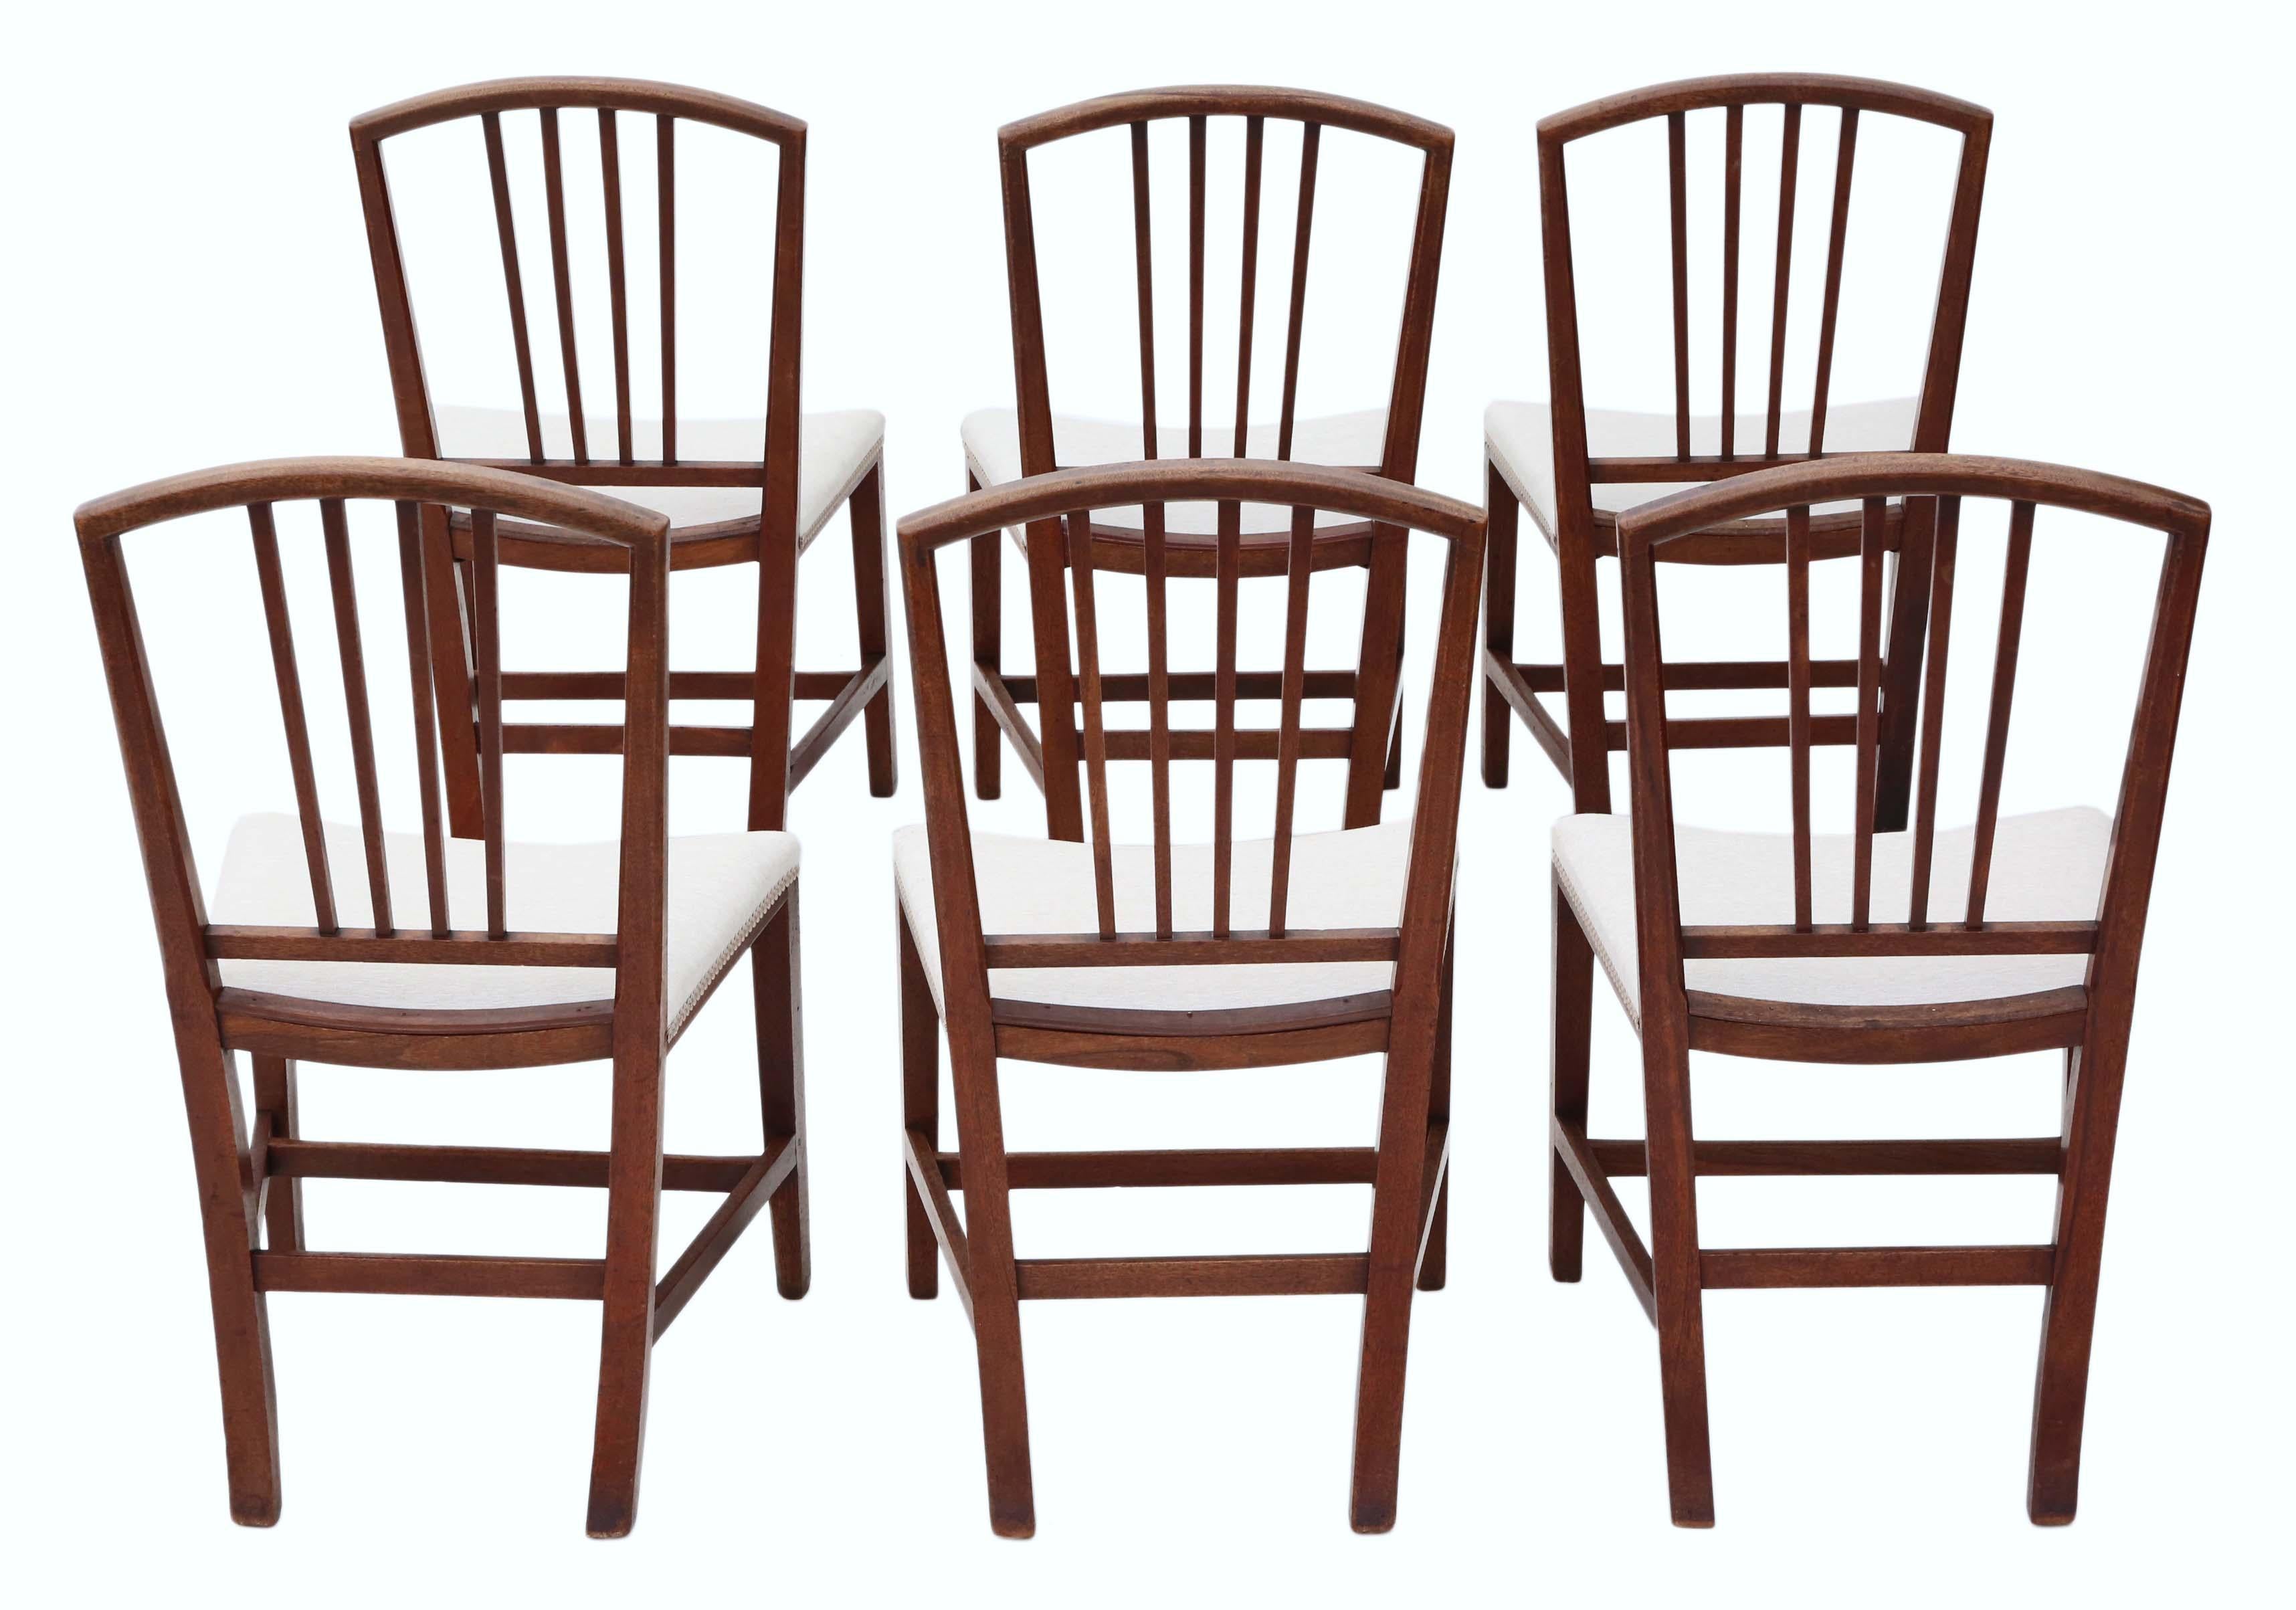 Set of 6 Victorian circa 1900 mahogany Georgian revival dining chairs.
No loose joints. Full of age, character and charm. Simple, clean design.
Good new upholstery in a heavy weight cotton fabric, with a natural, light oatmeal color.
Would look